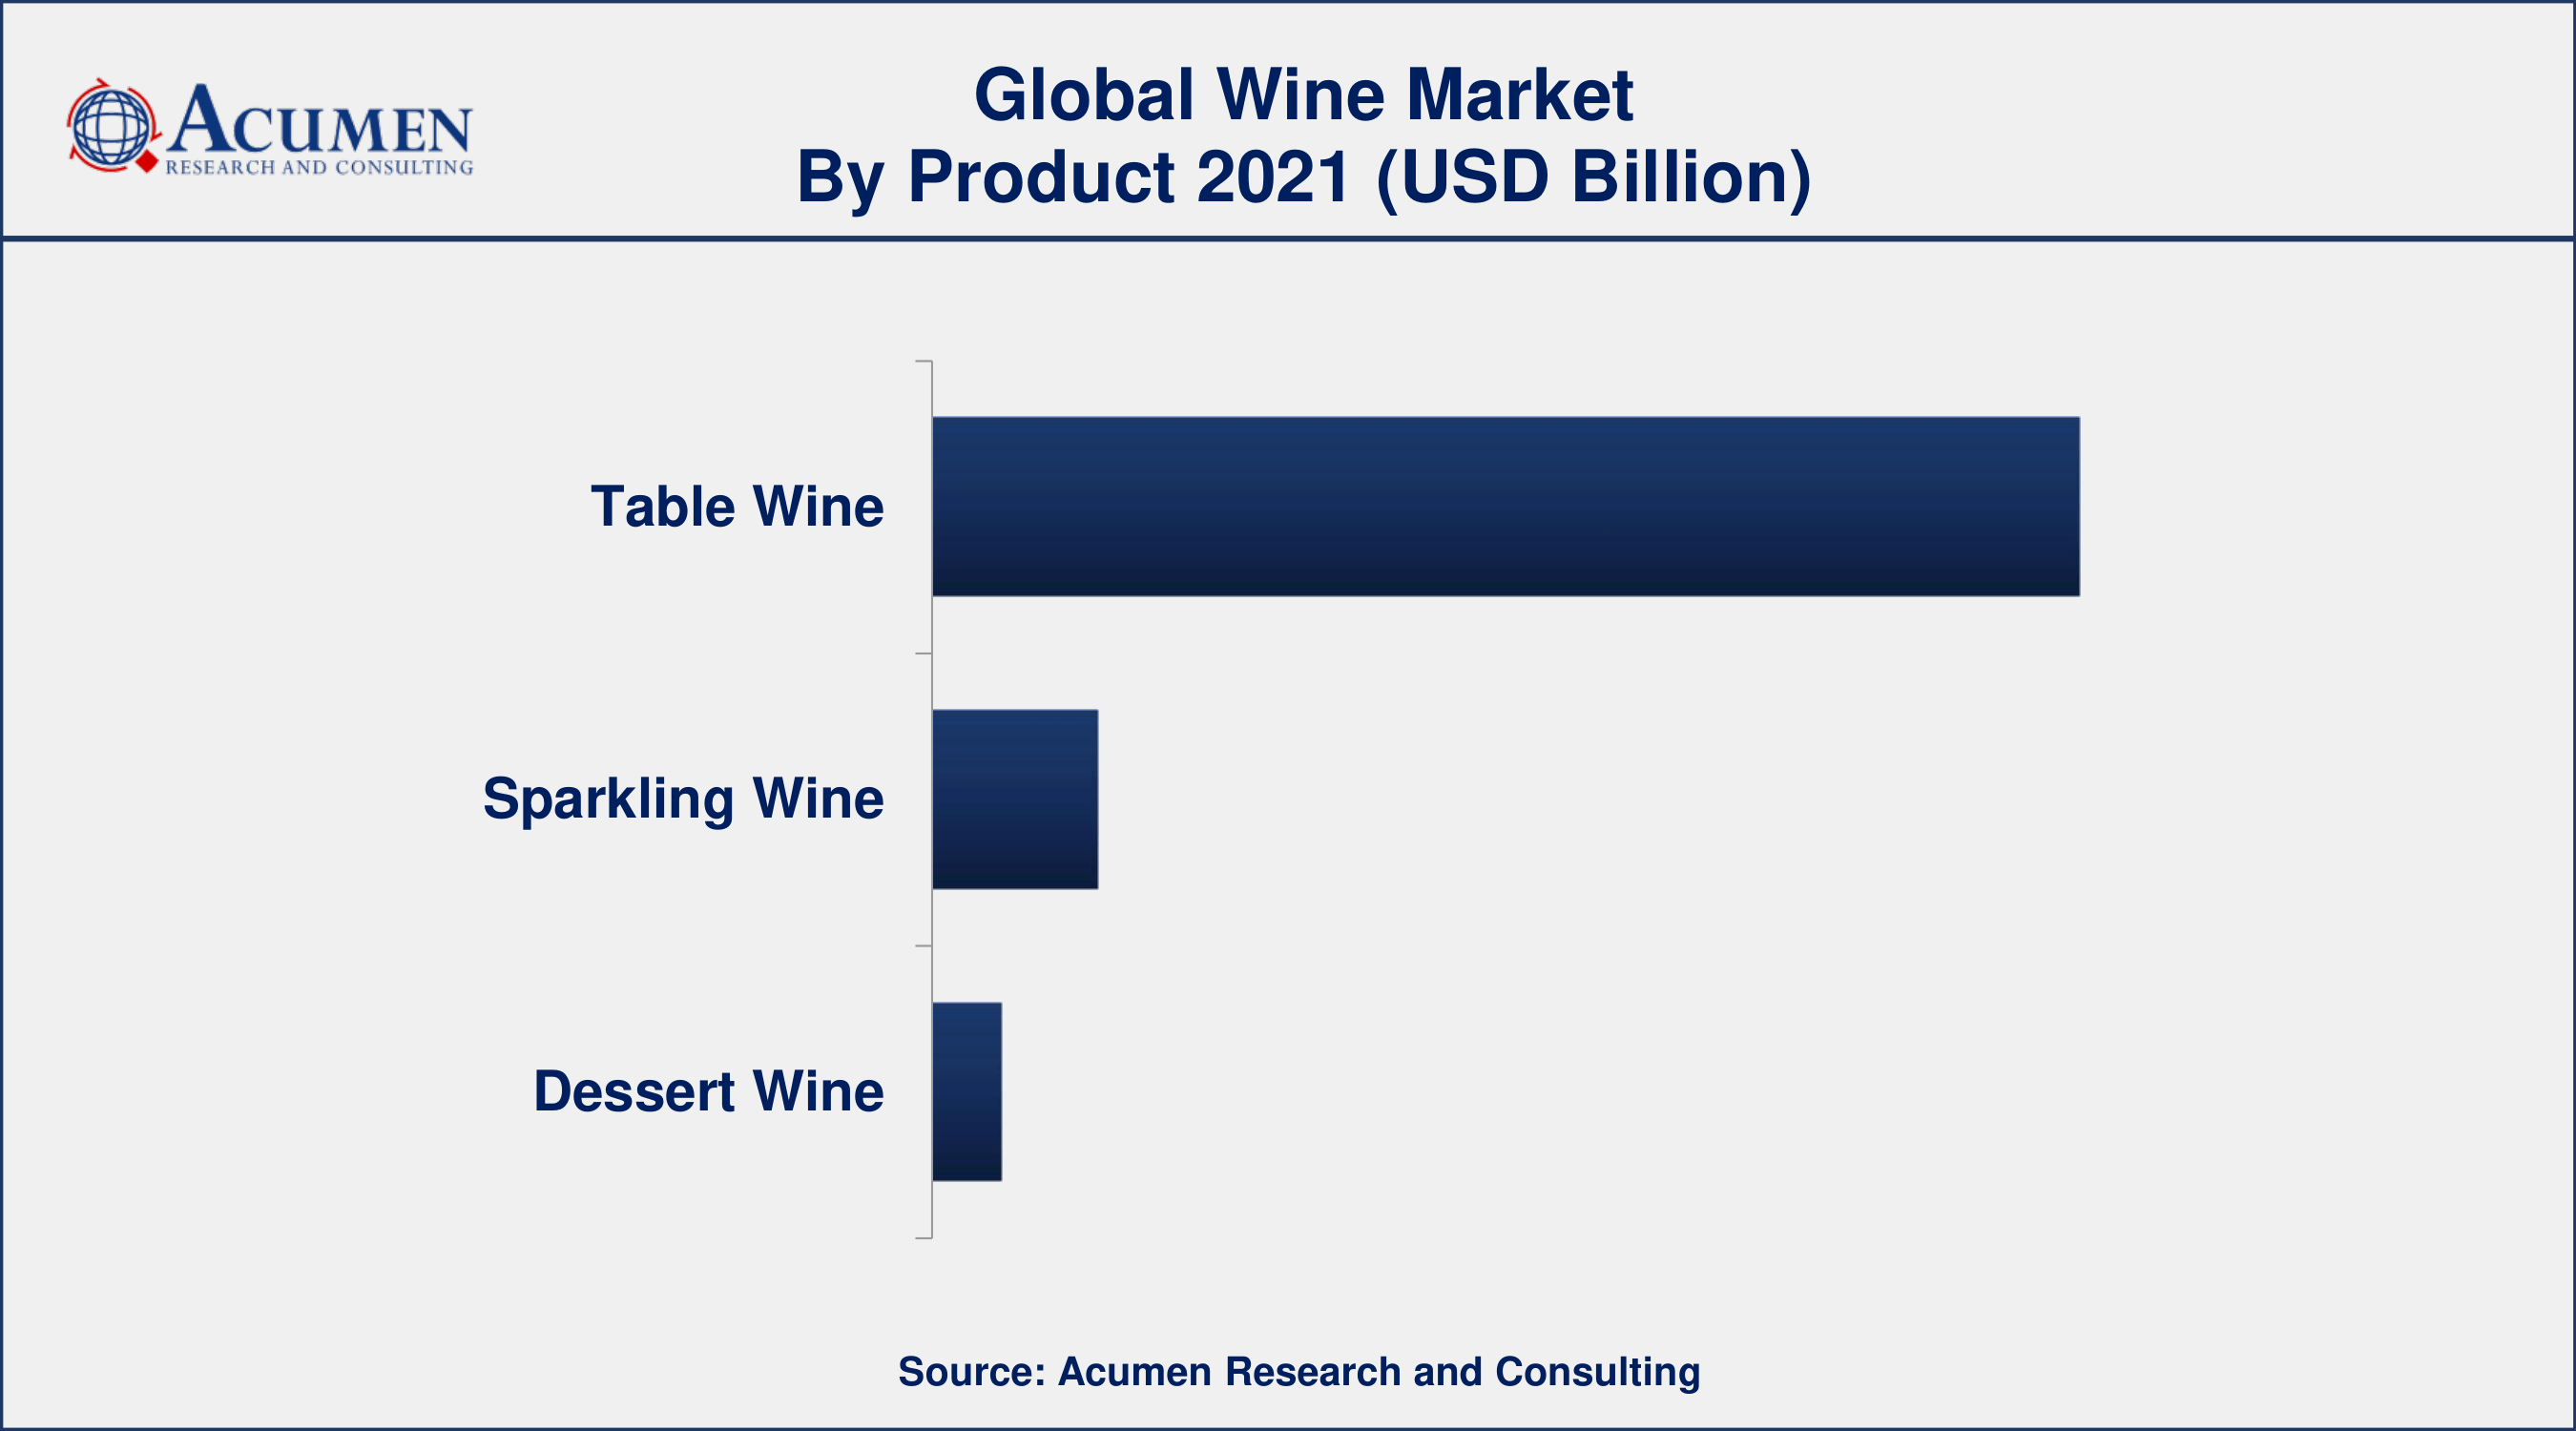 Based on product, table wine segment accounted for over 80% of the overall market share in 2021